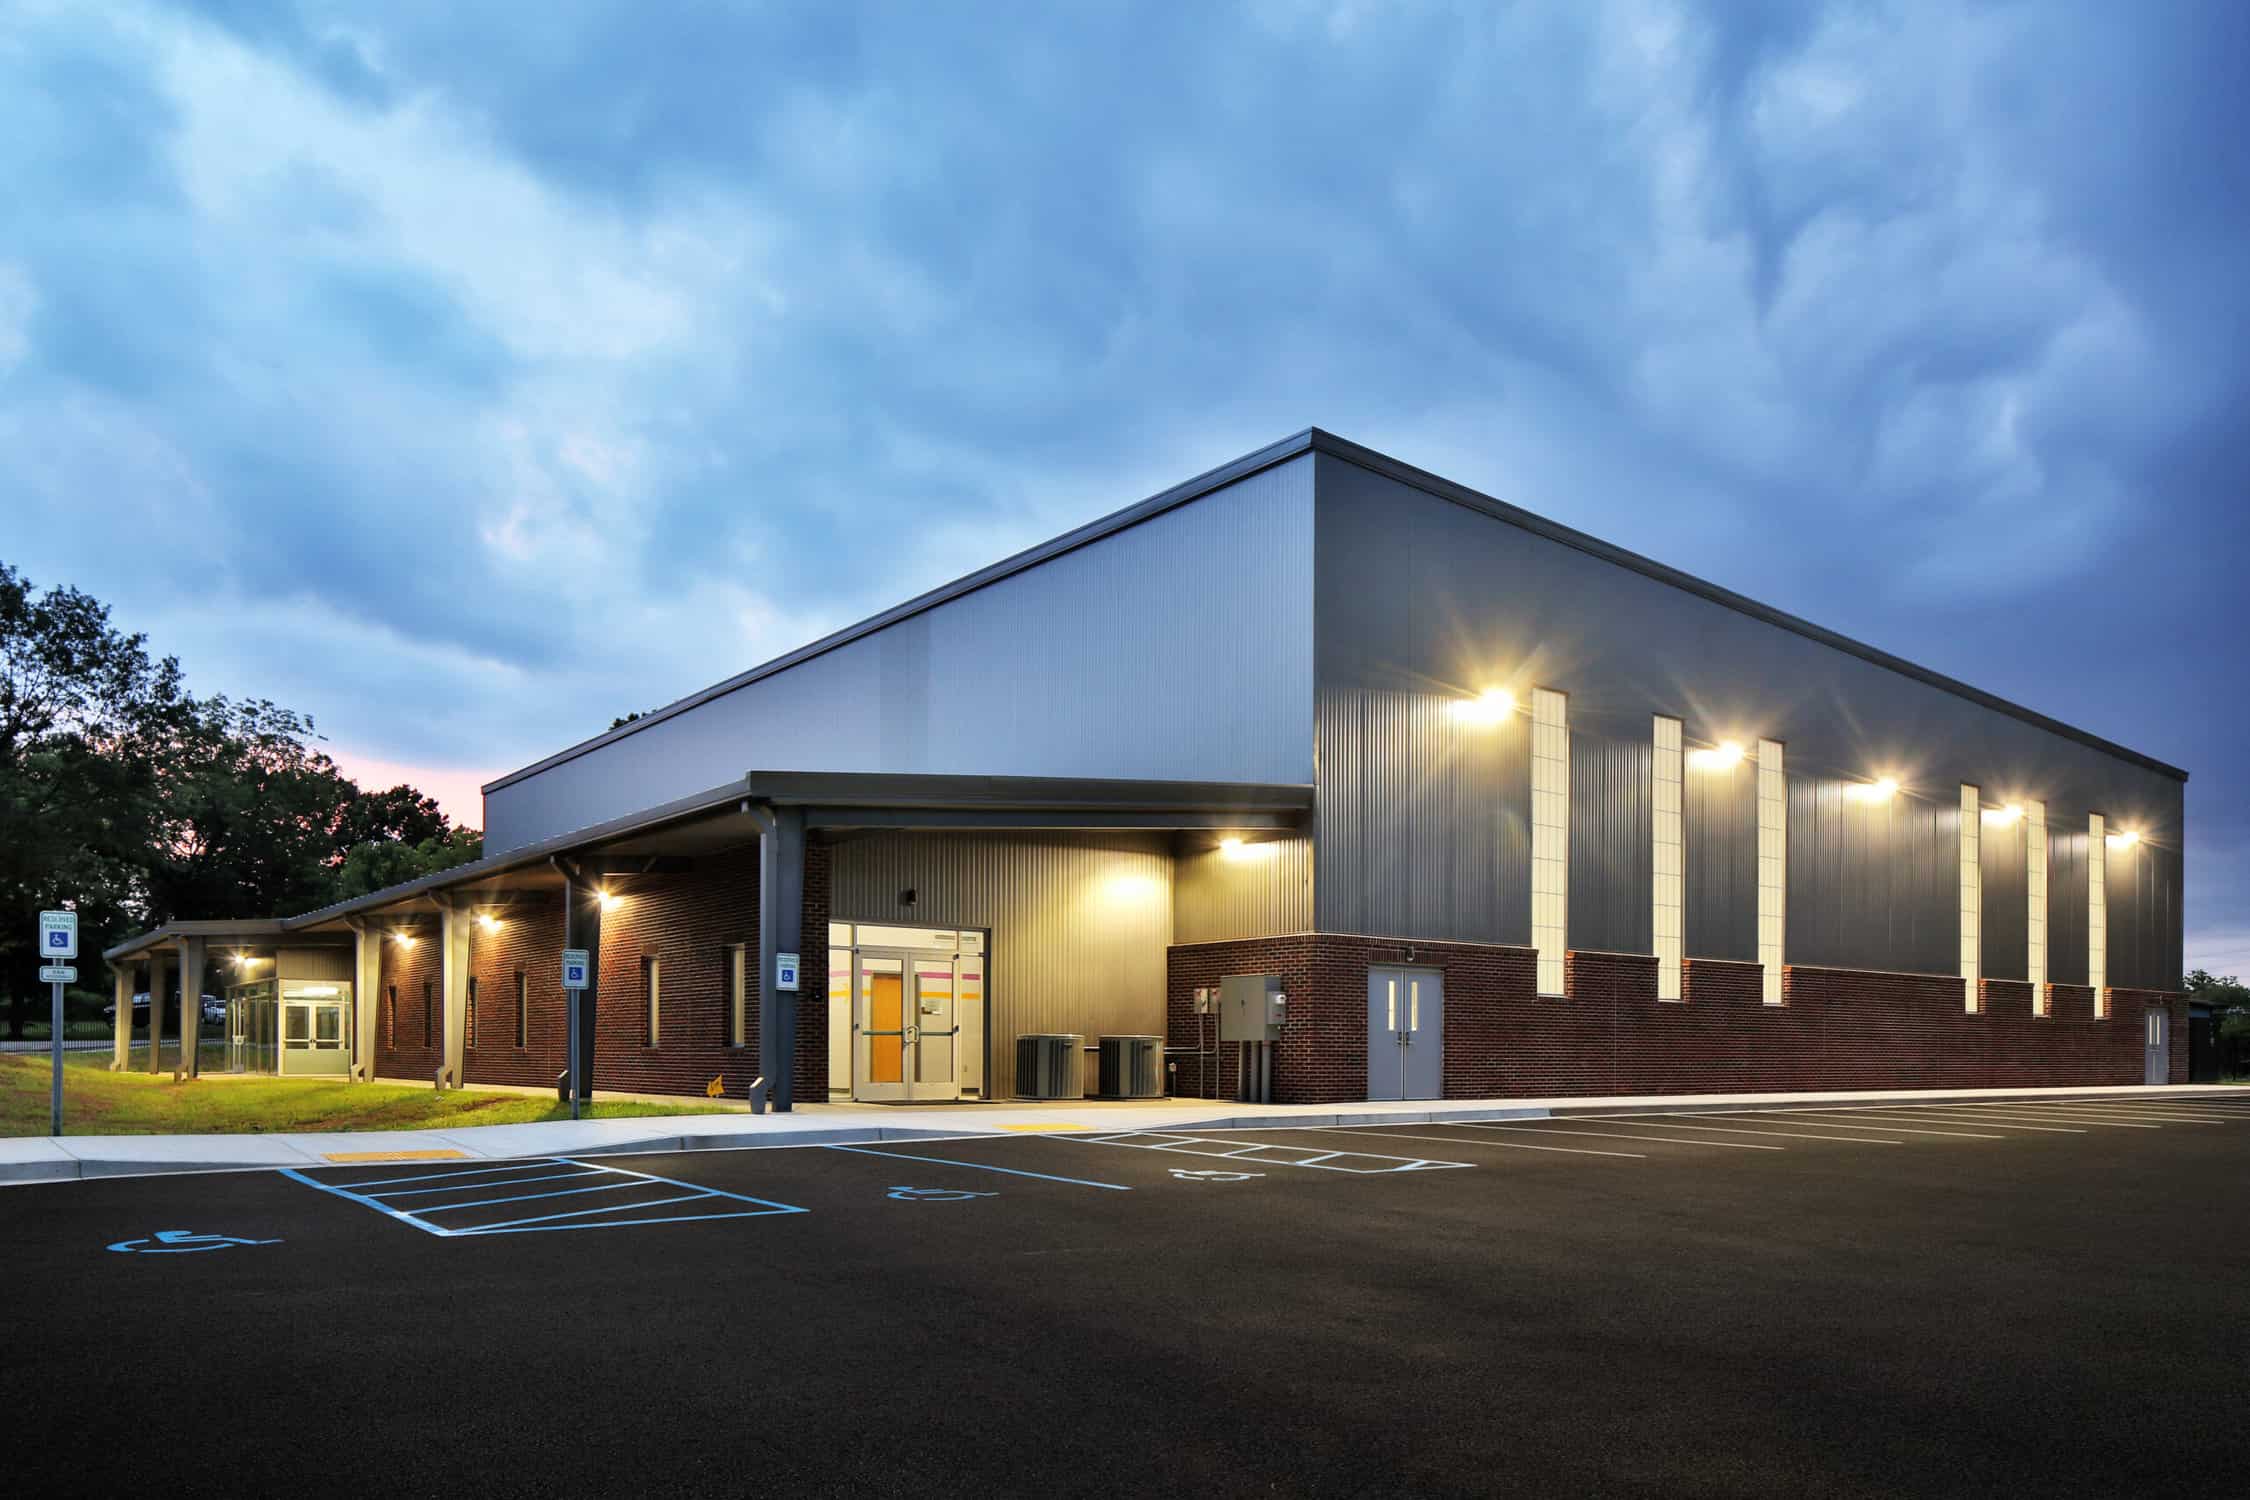 Exterior warehouse gym building at night